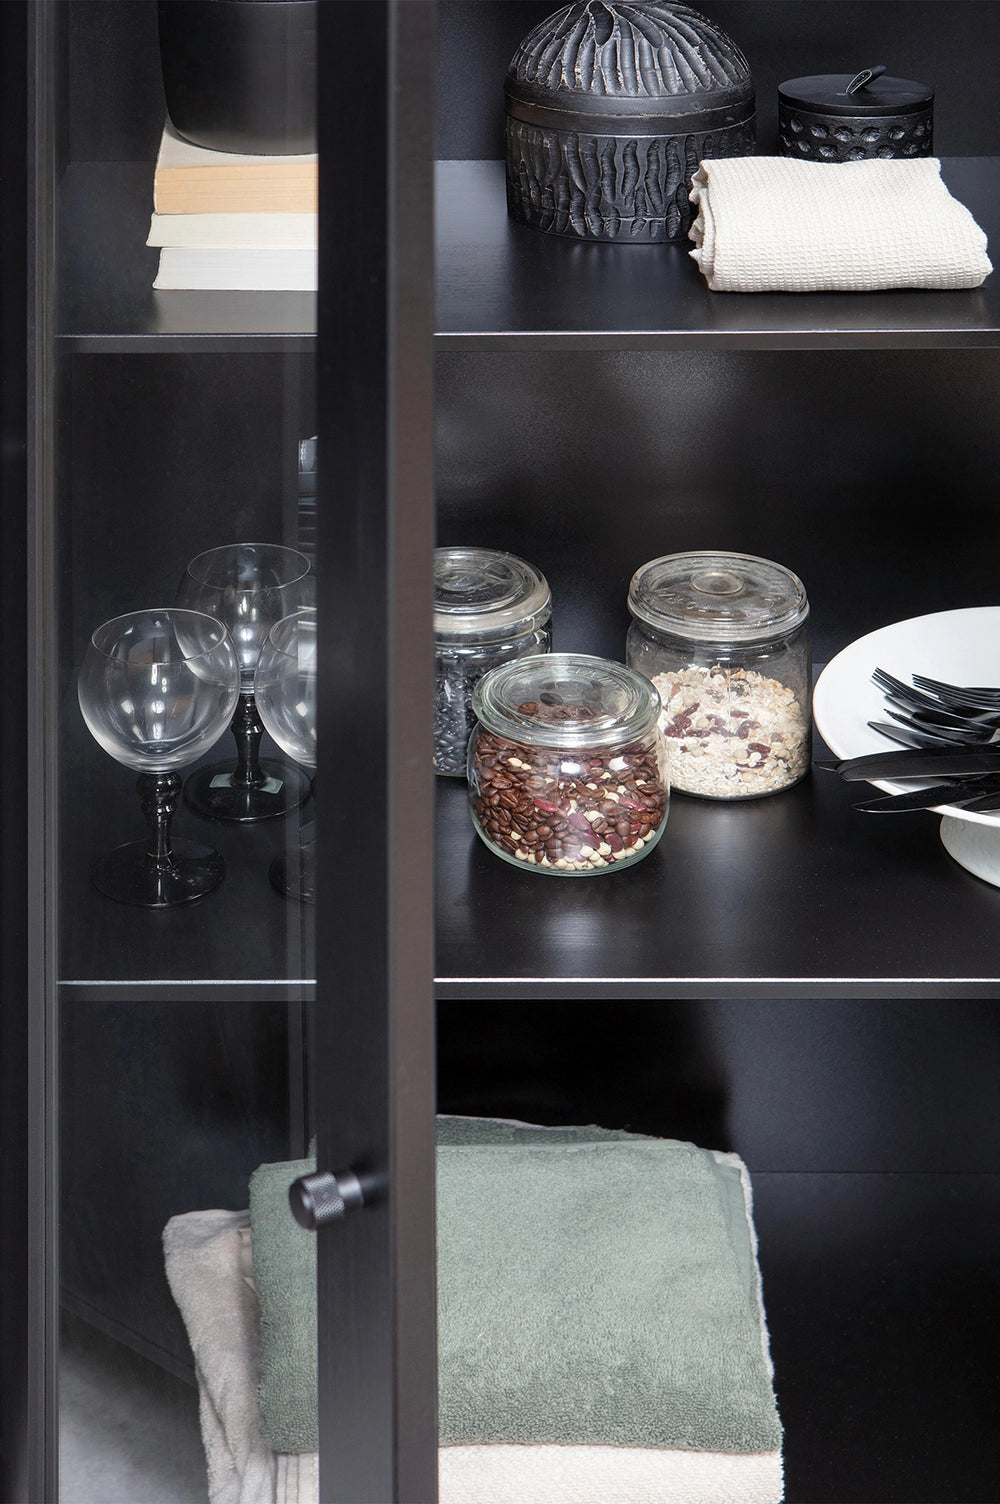 Edame Display Cabinet in - Black Finish with Condiments and Utensils